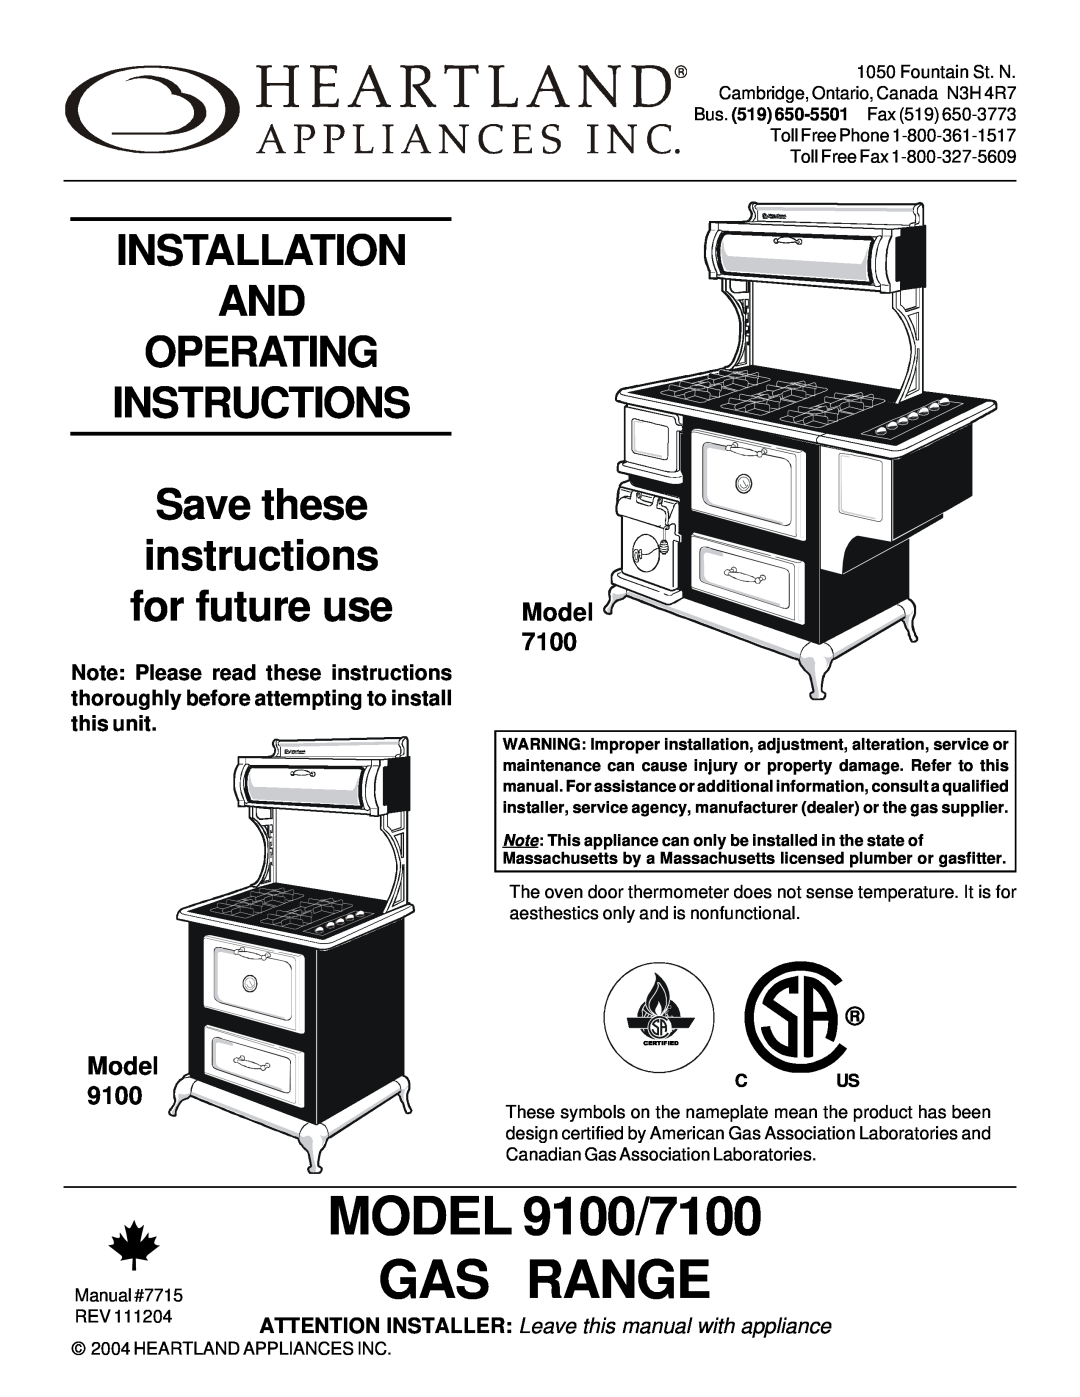 Hearth and Home Technologies manual Installation And Operating Instructions, Model, MODEL 9100/7100 GAS RANGE, Bus 